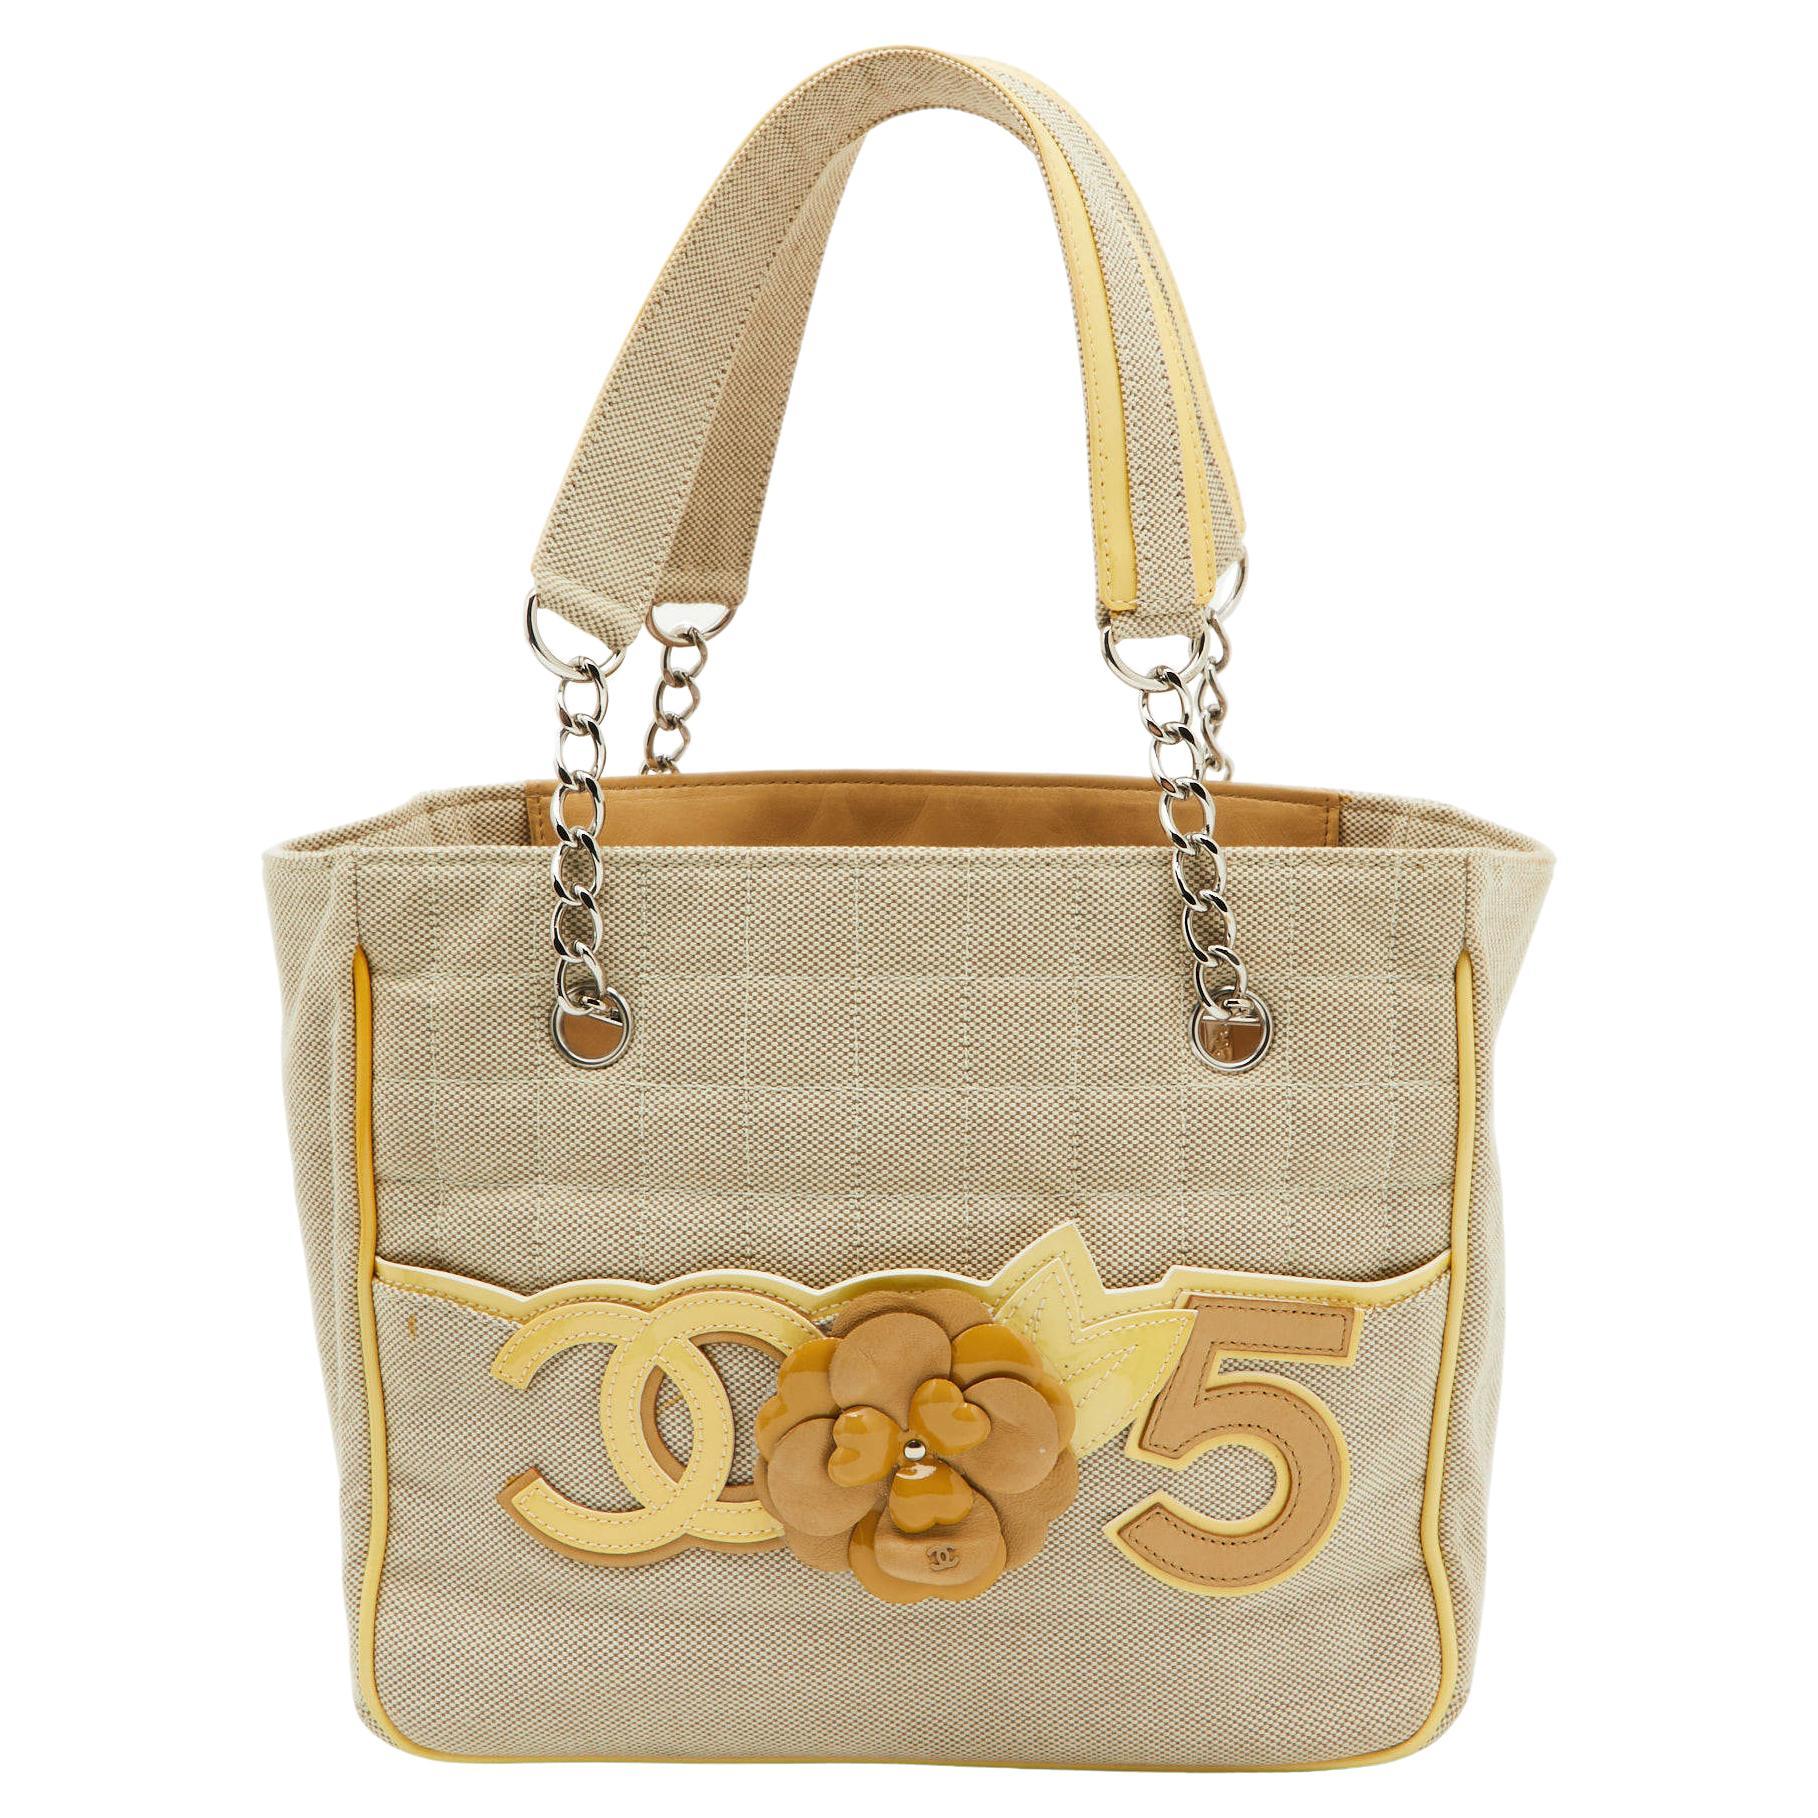 Chanel Beige/Yellow Canvas and Patent Leather Camellia No.5 Tote